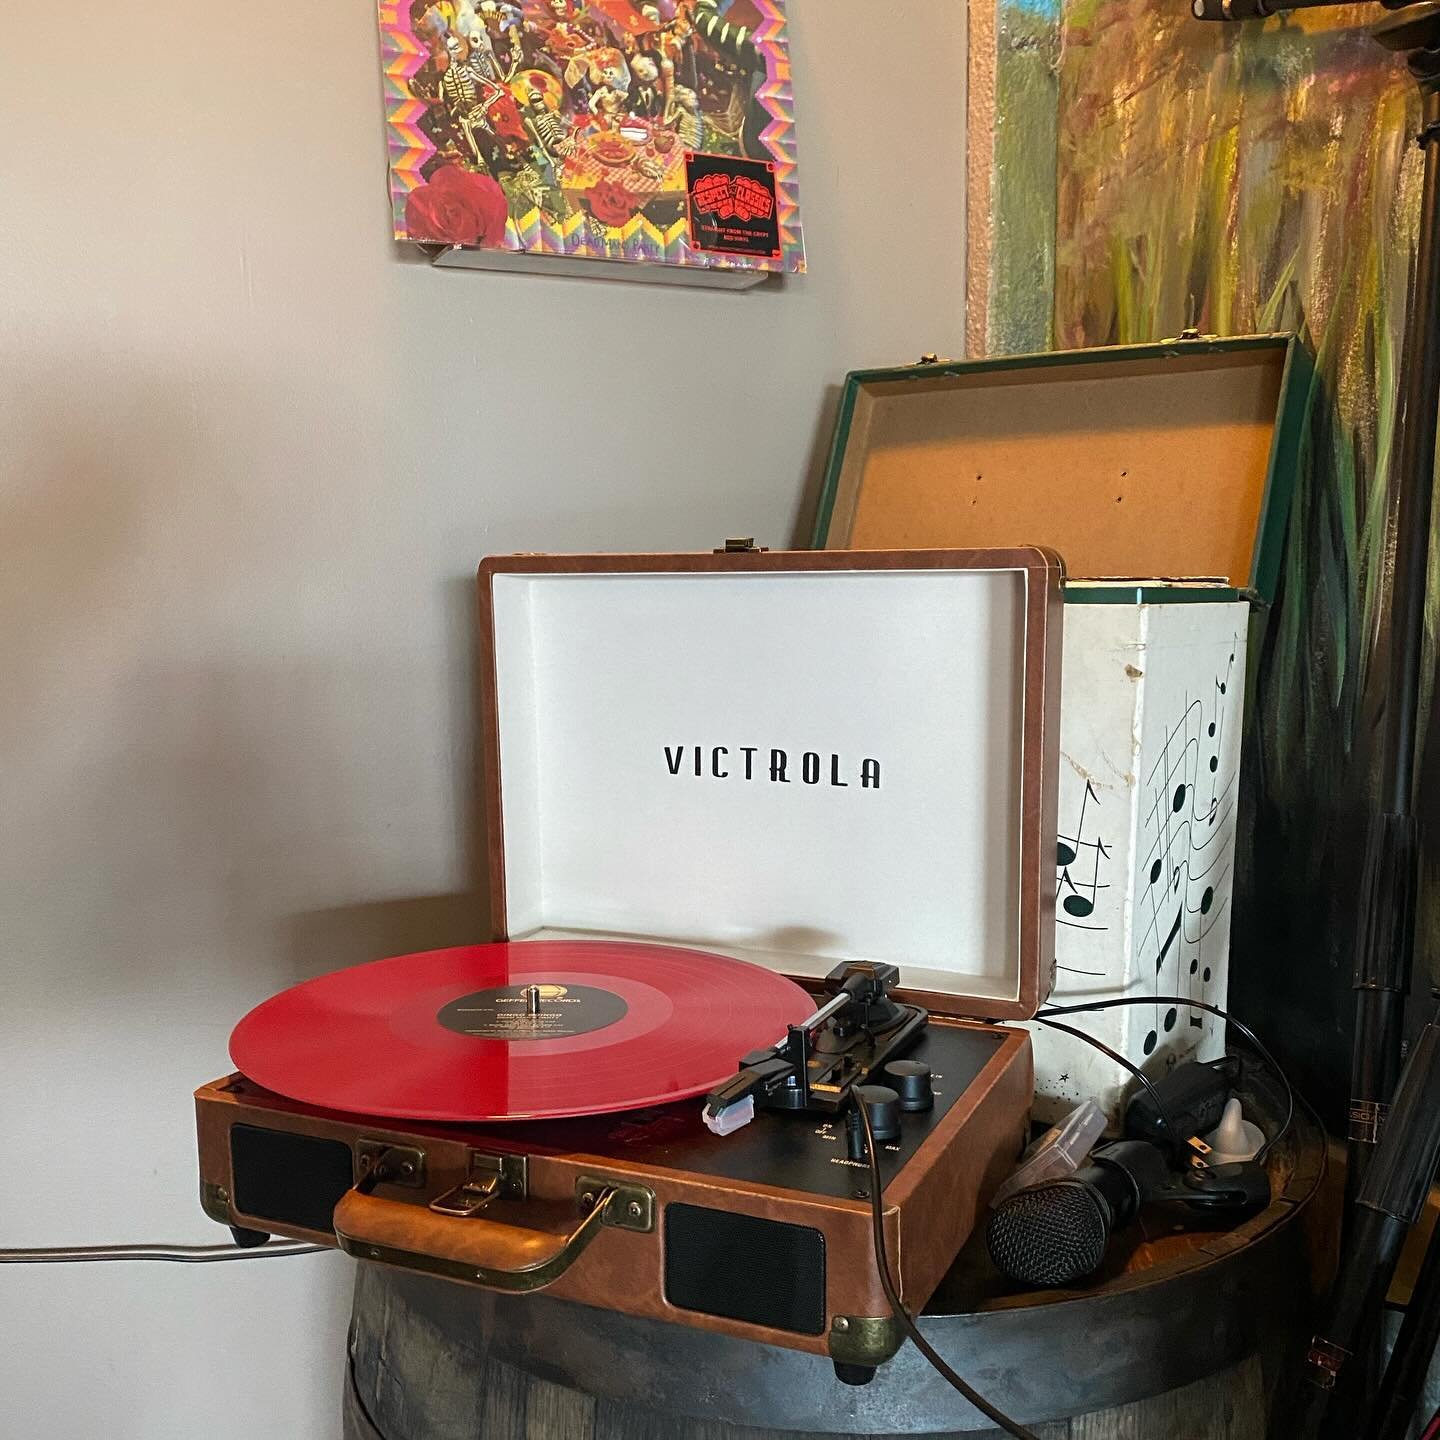 It&rsquo;s a yoga and vinyl weekend! Saturday morning we will have Kelly back again for an hour of vinyasa yoga, and Sunday will be our monthly Board Games and Records Day! Bring your favorite games and your coolest records, as well as your mother, t